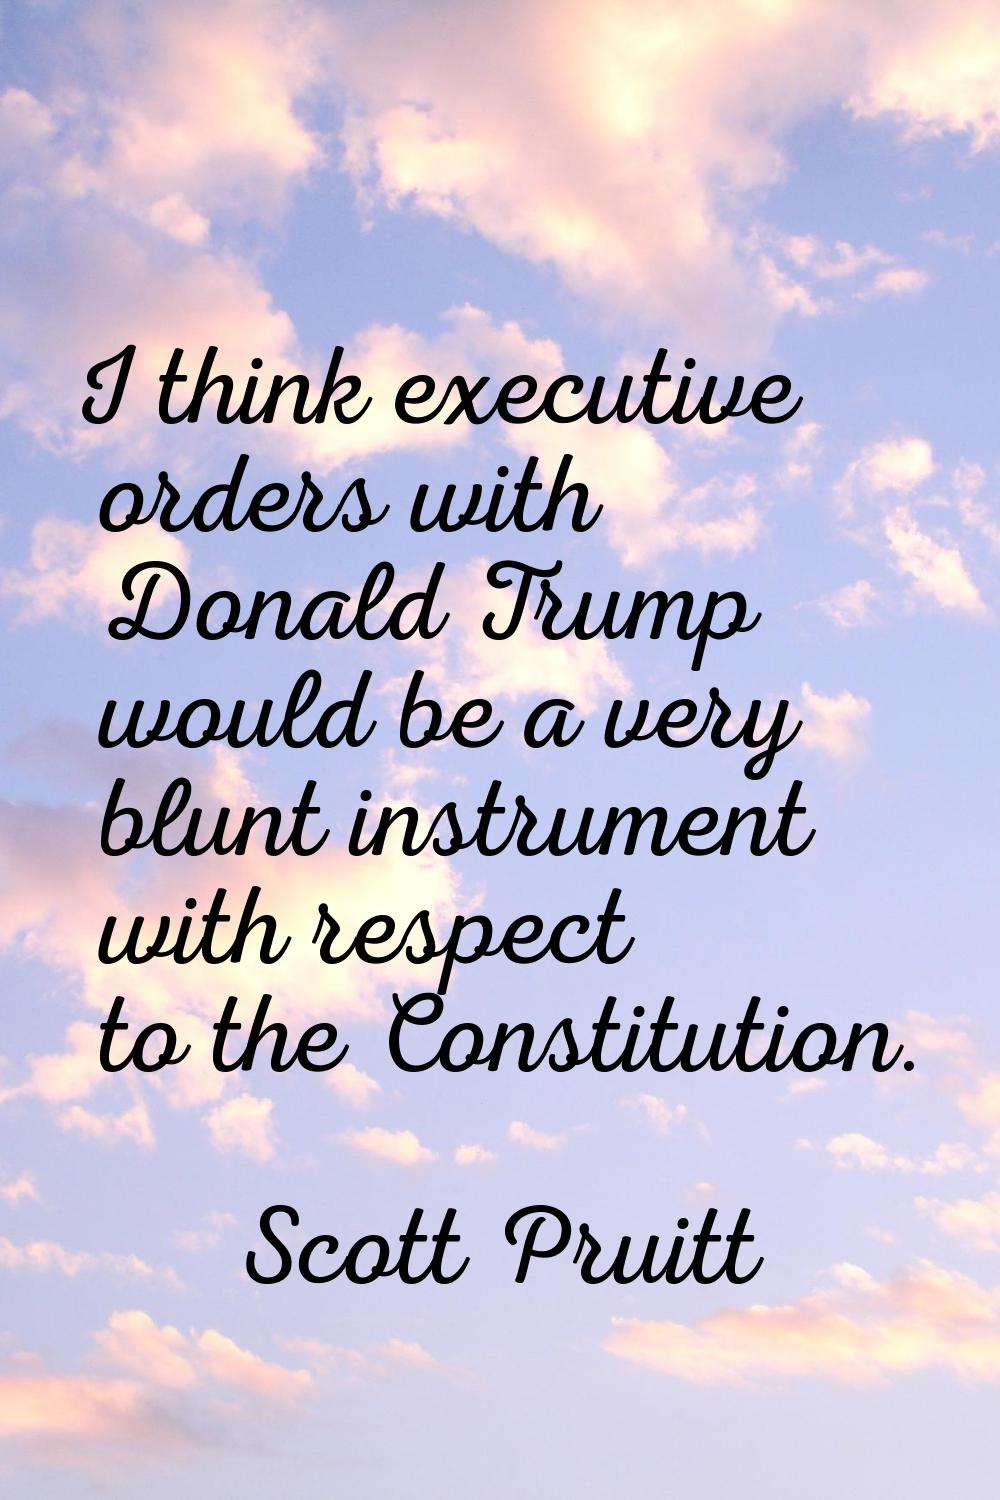 I think executive orders with Donald Trump would be a very blunt instrument with respect to the Con